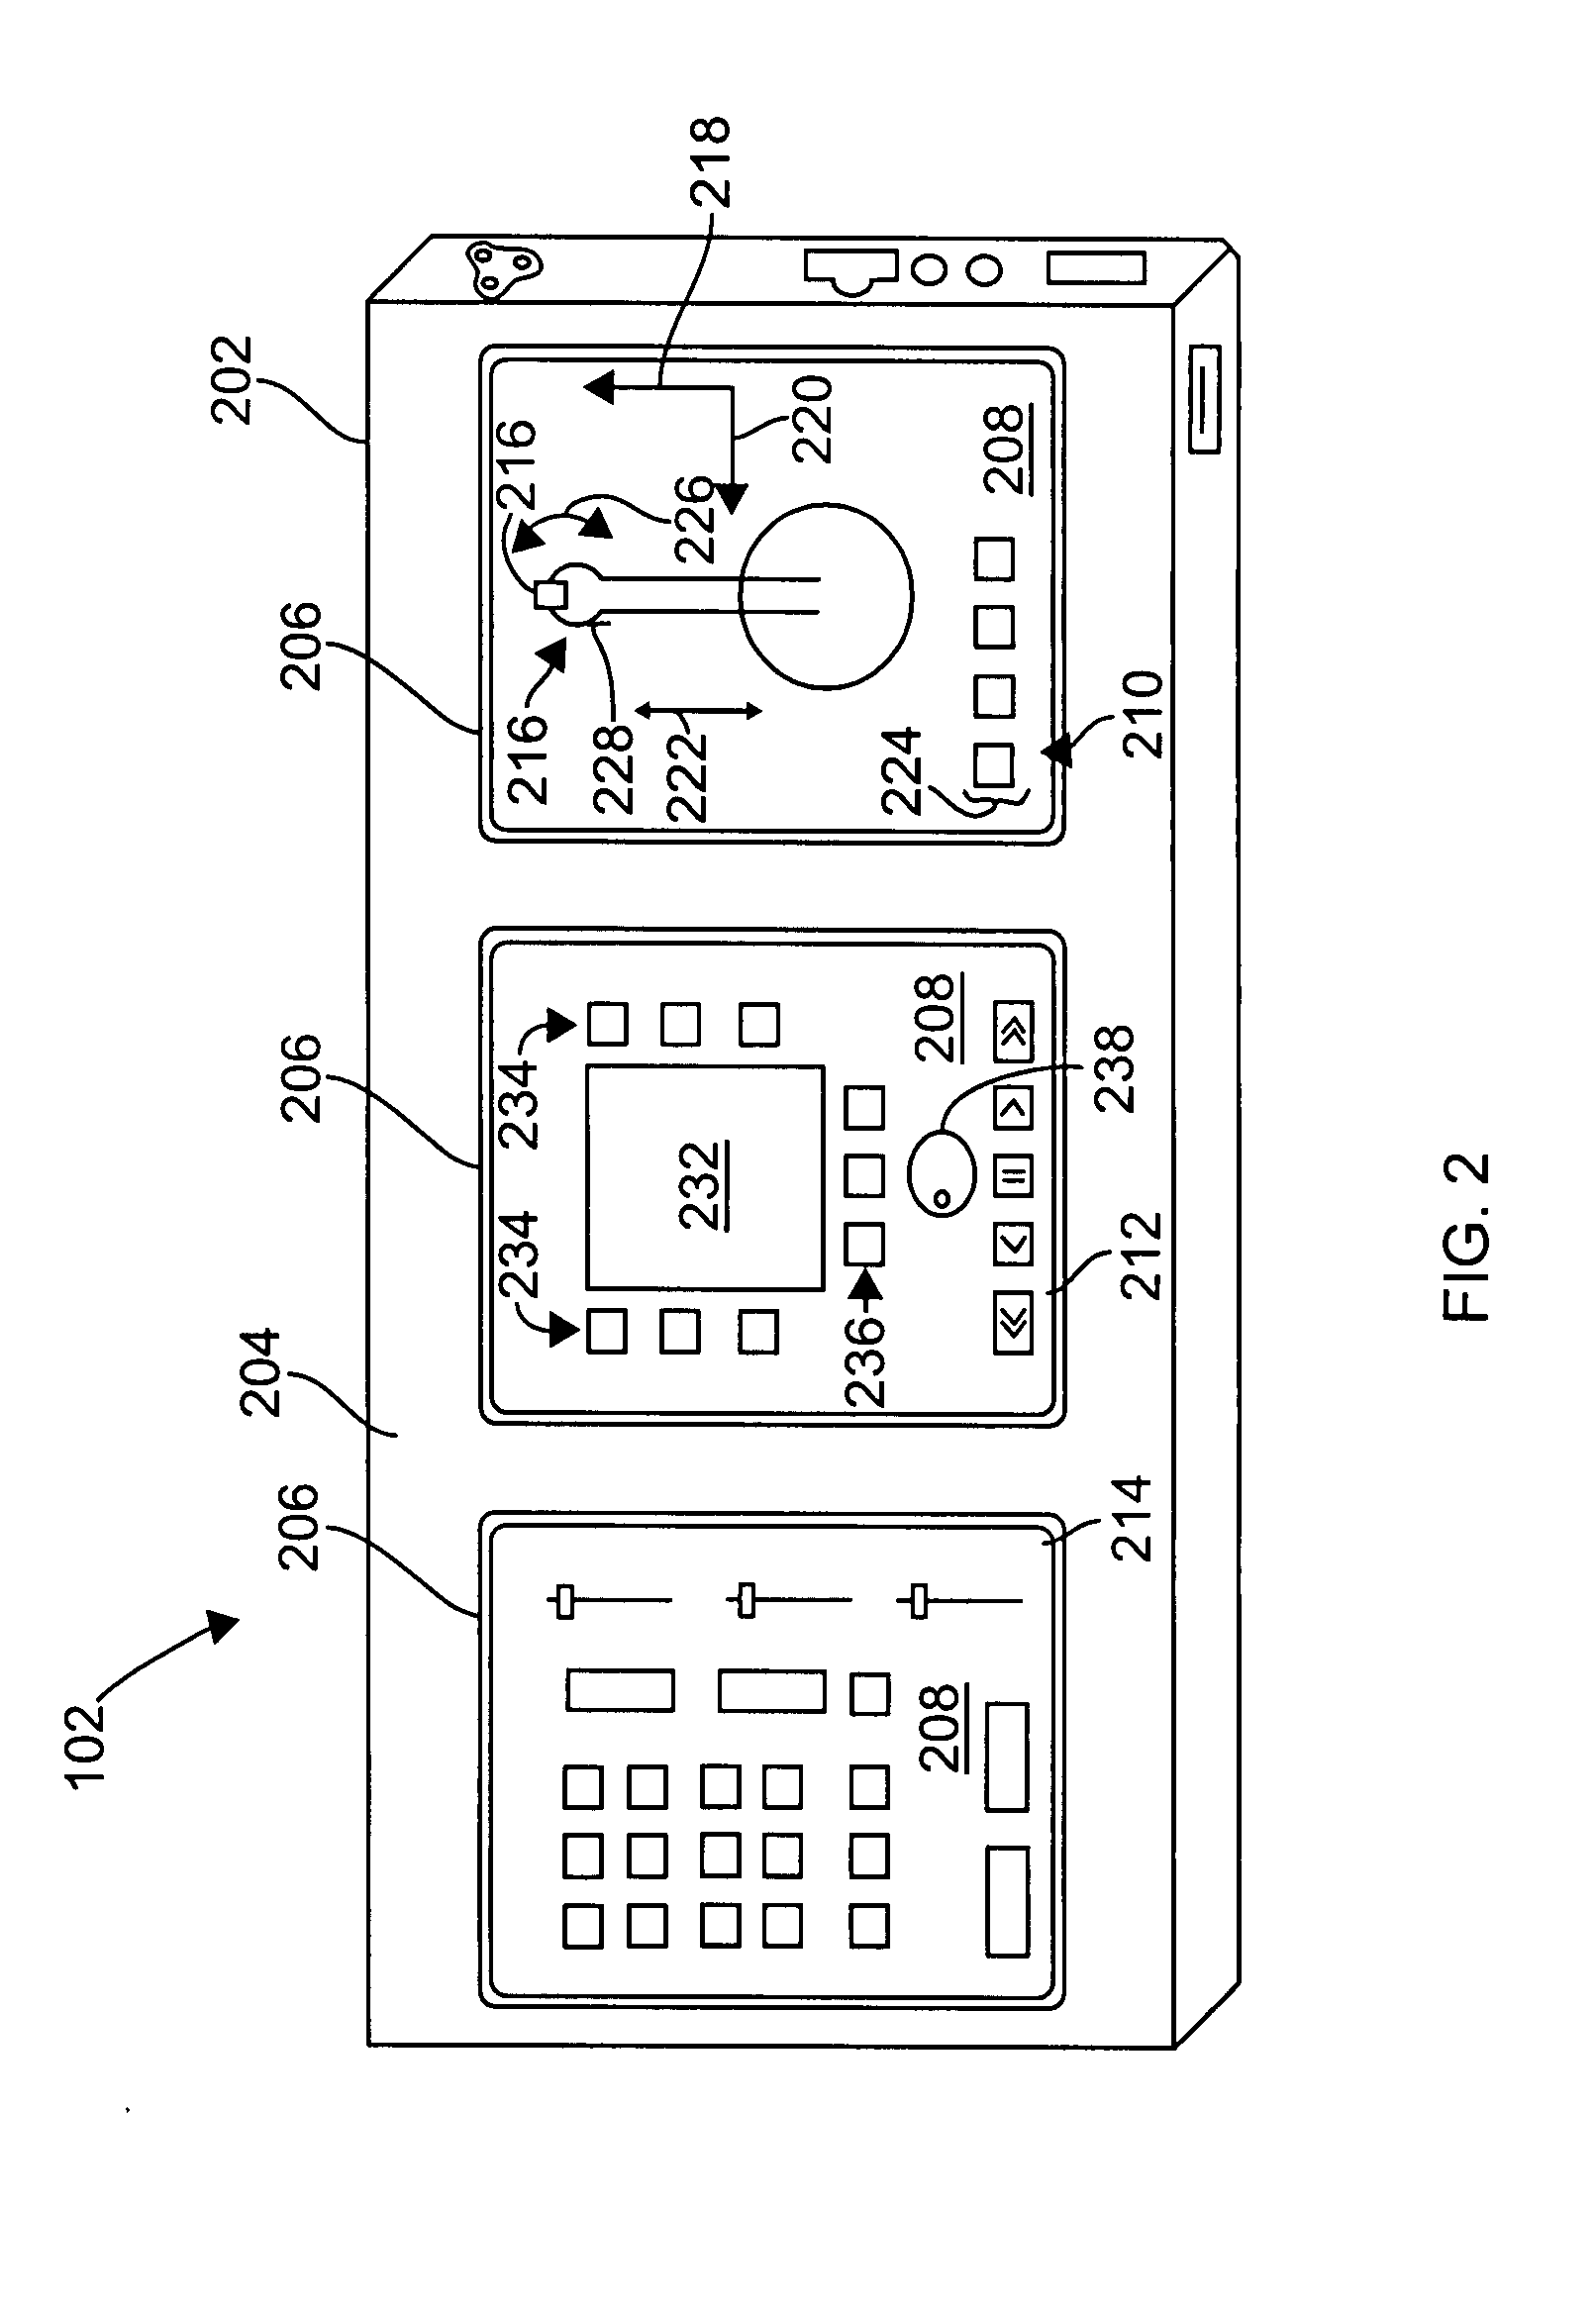 Methods and systems for operating a video surveillance system